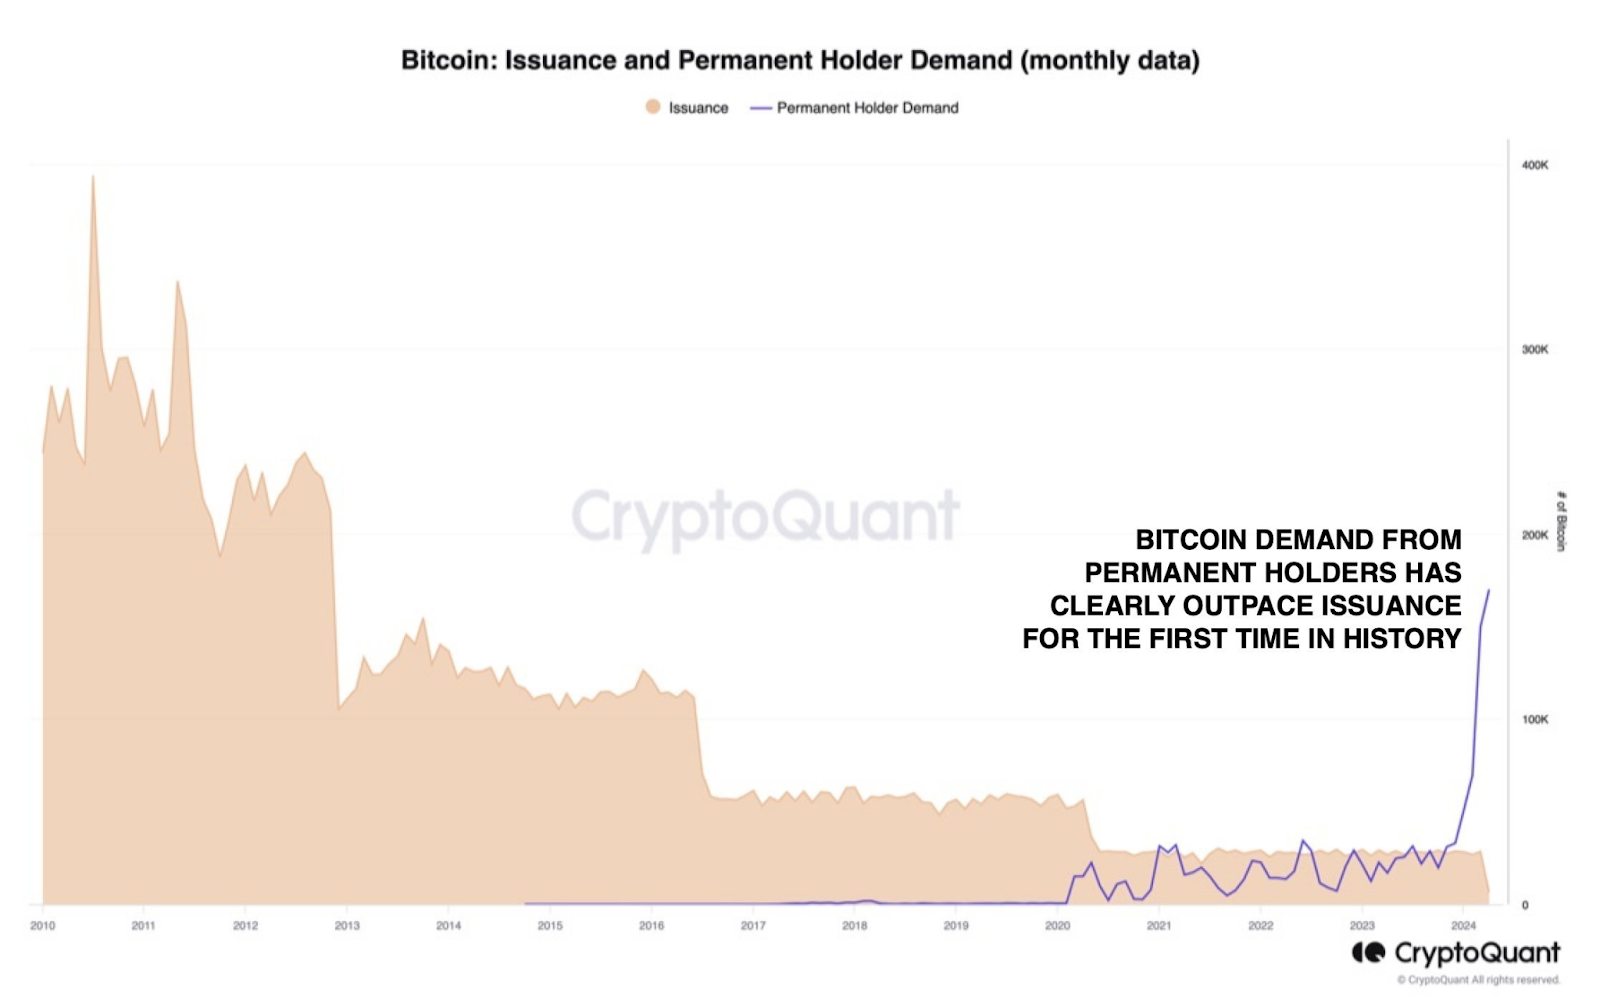 CryptoQuant (Bitcoin issuance vs. permanent holder demand)